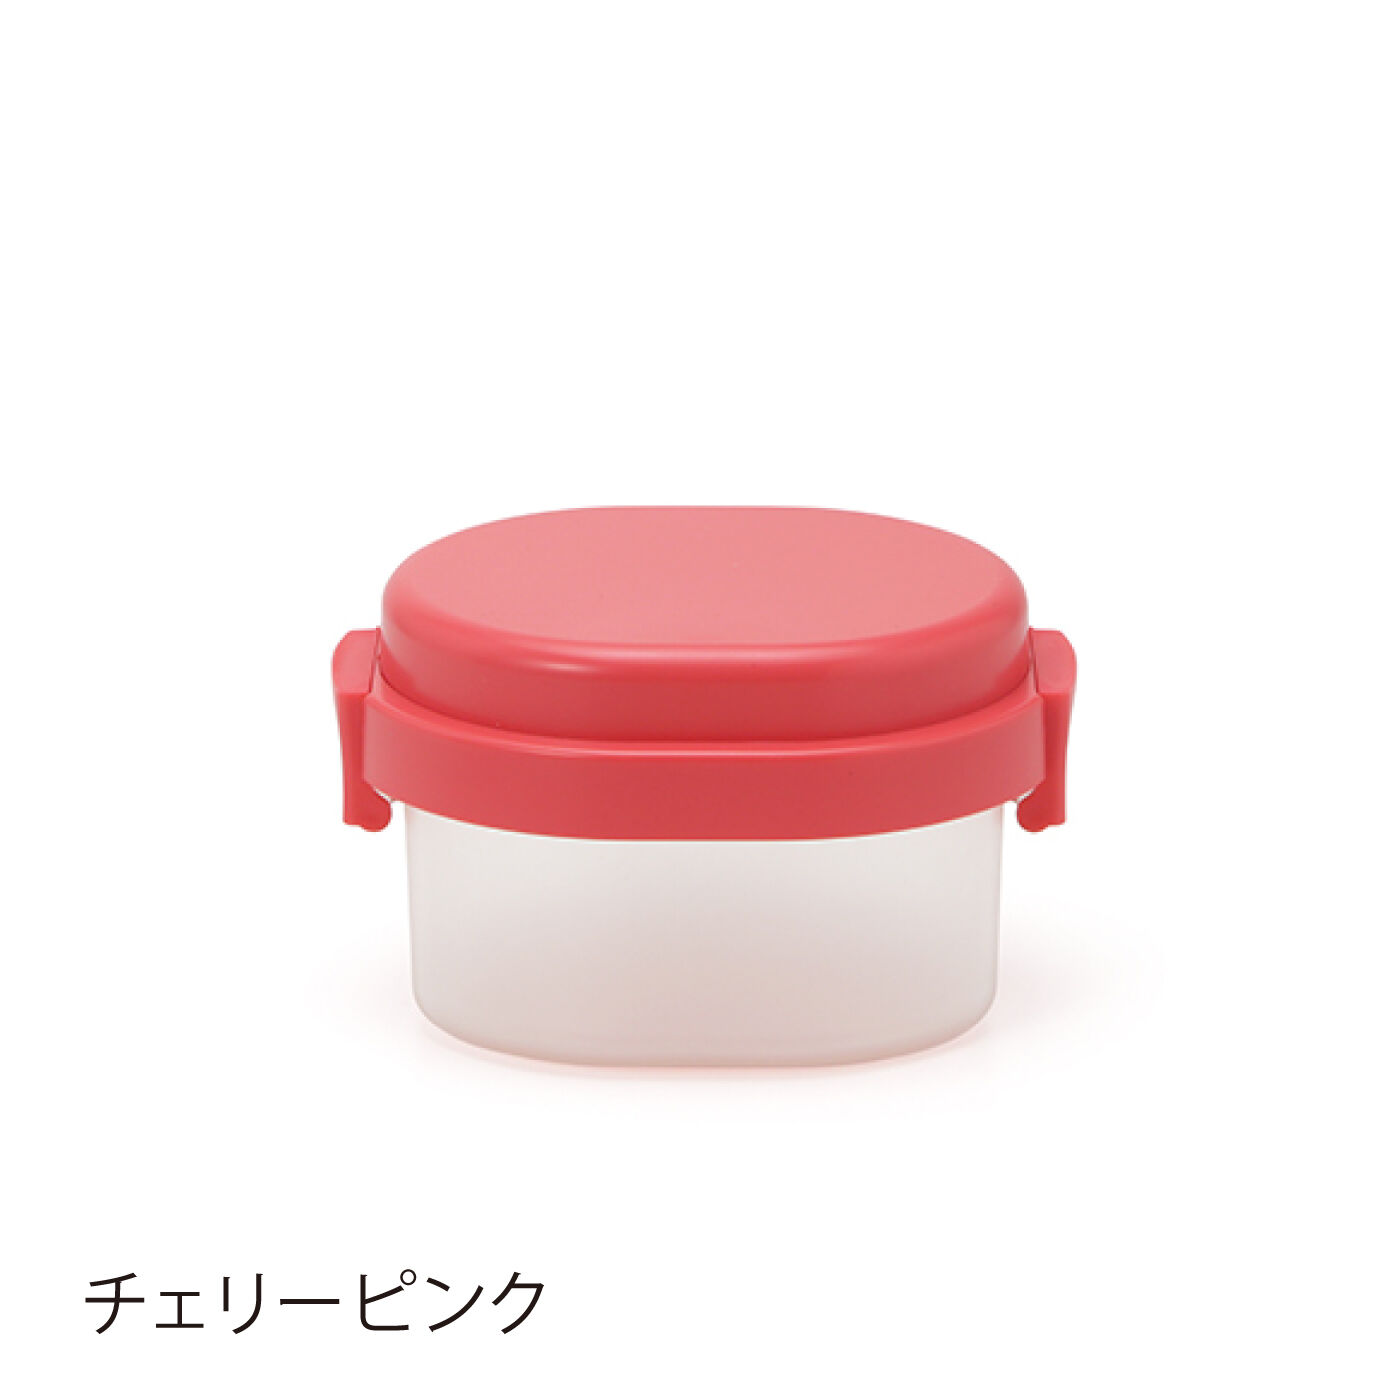 FELISSIMO PARTNERS|GEL-COOL plus dome Sサイズ CLEAR LUNCH BOX